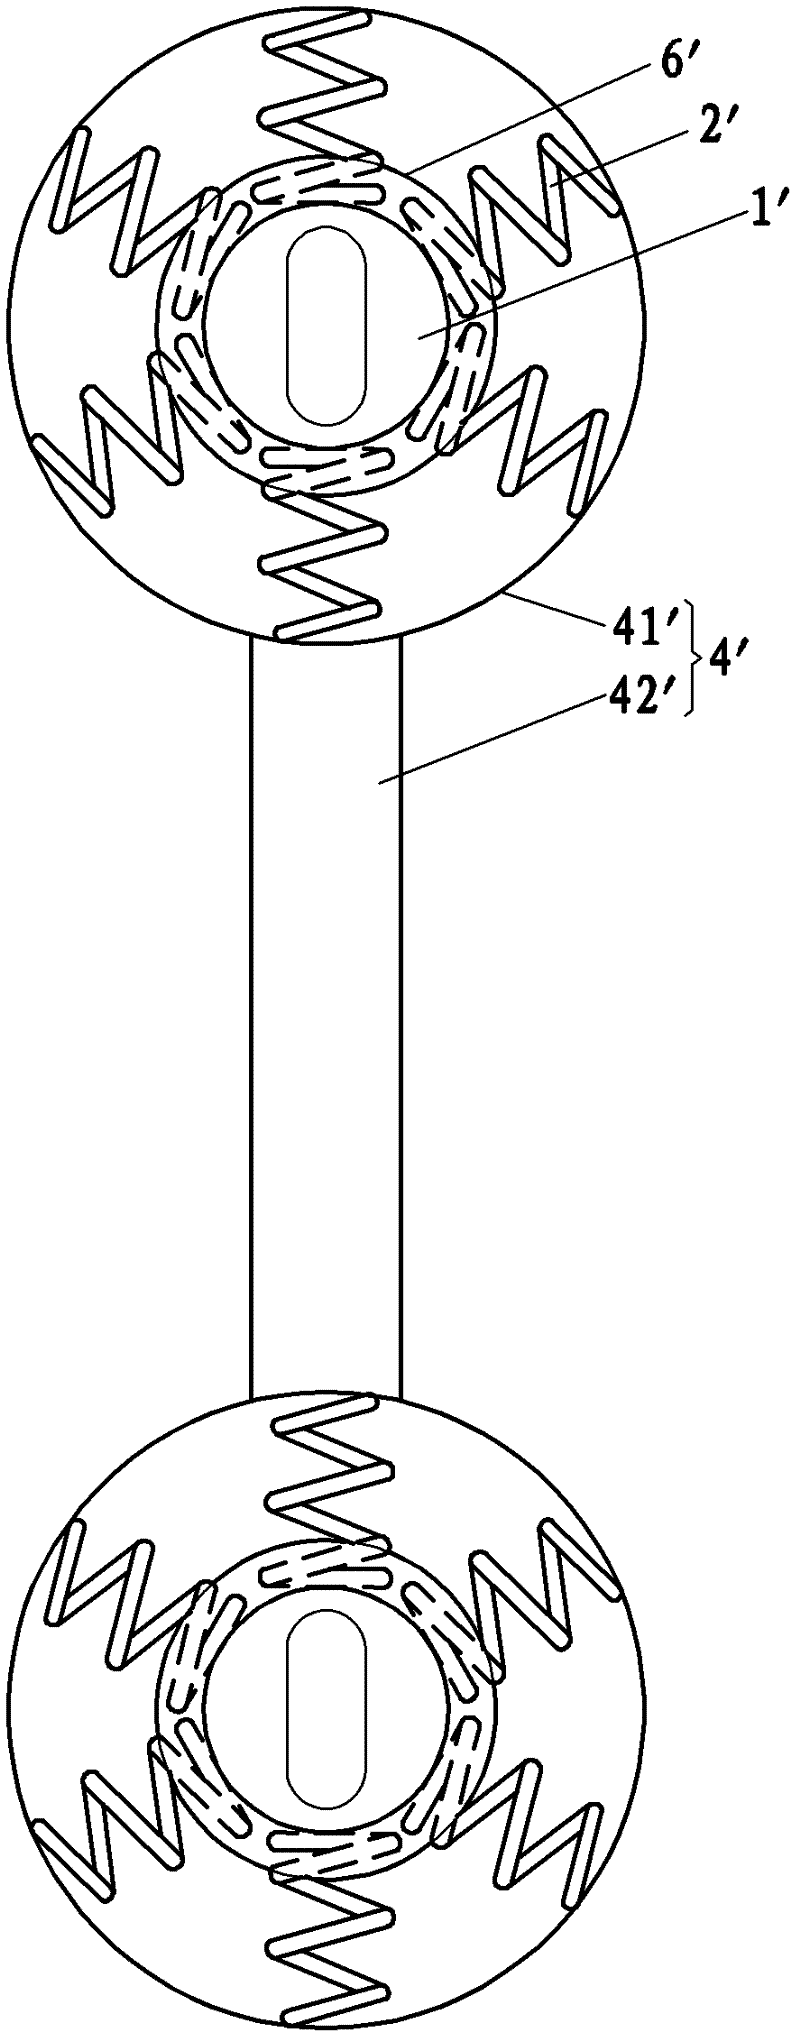 Improved reaction rod with joint assembly